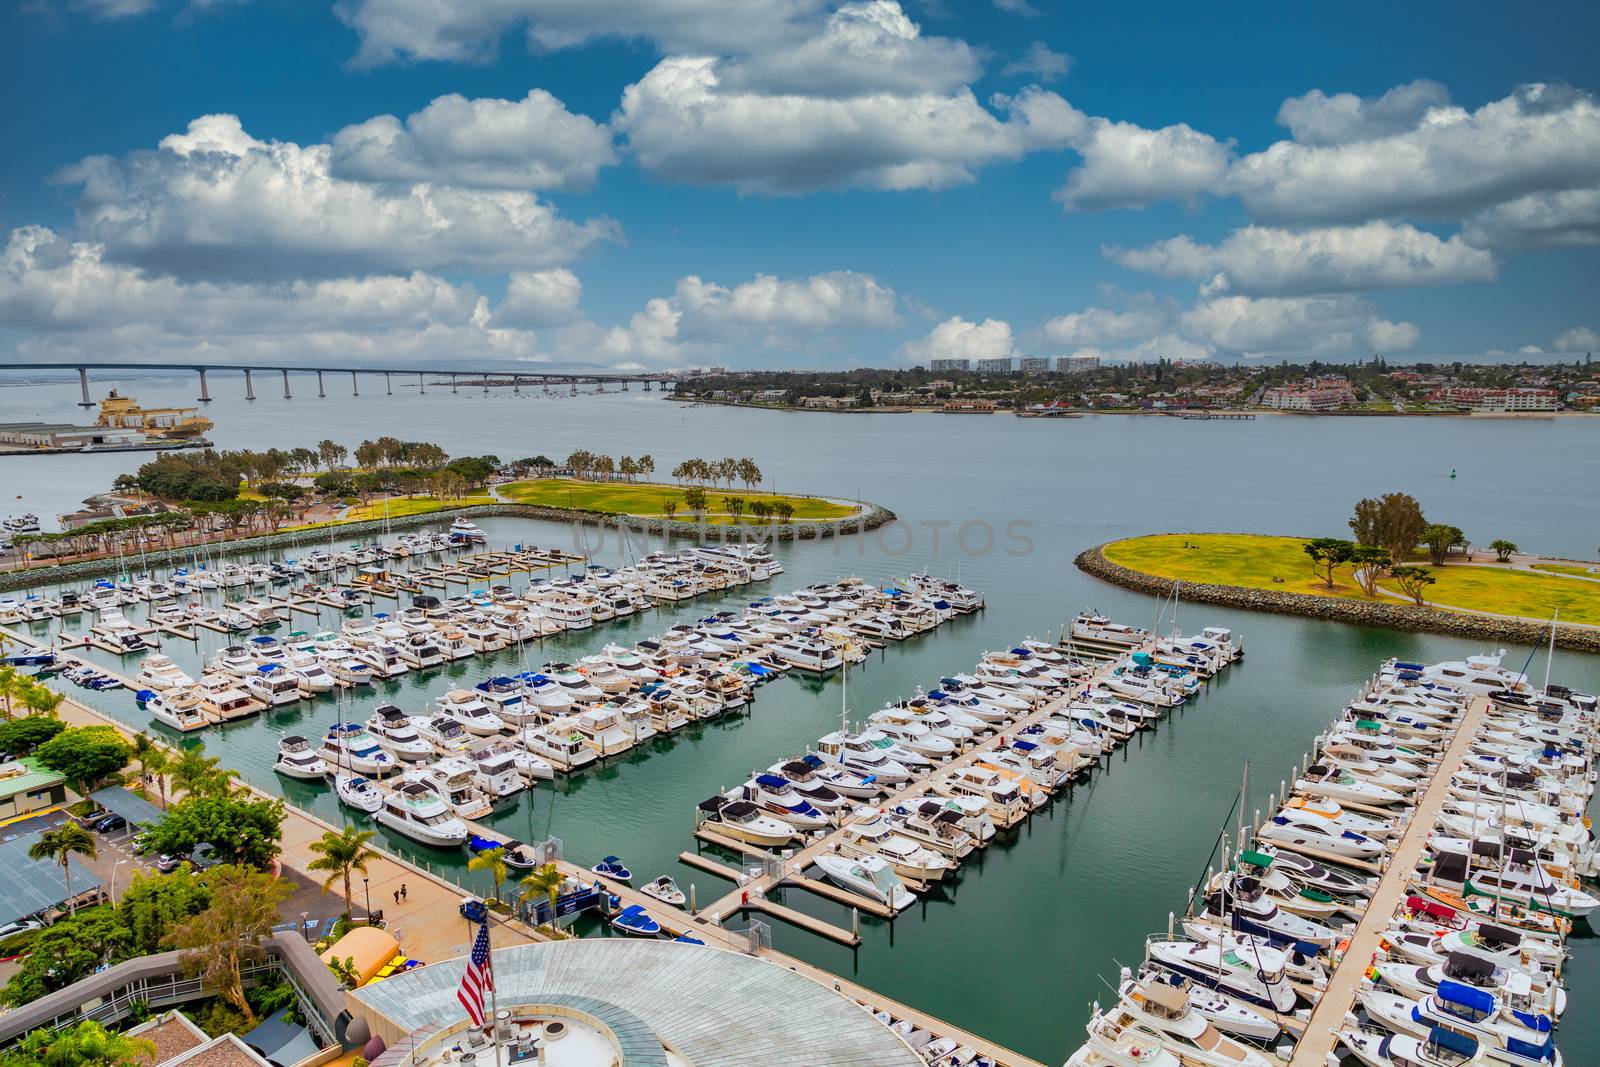 Many yachts in a marina in San Diego